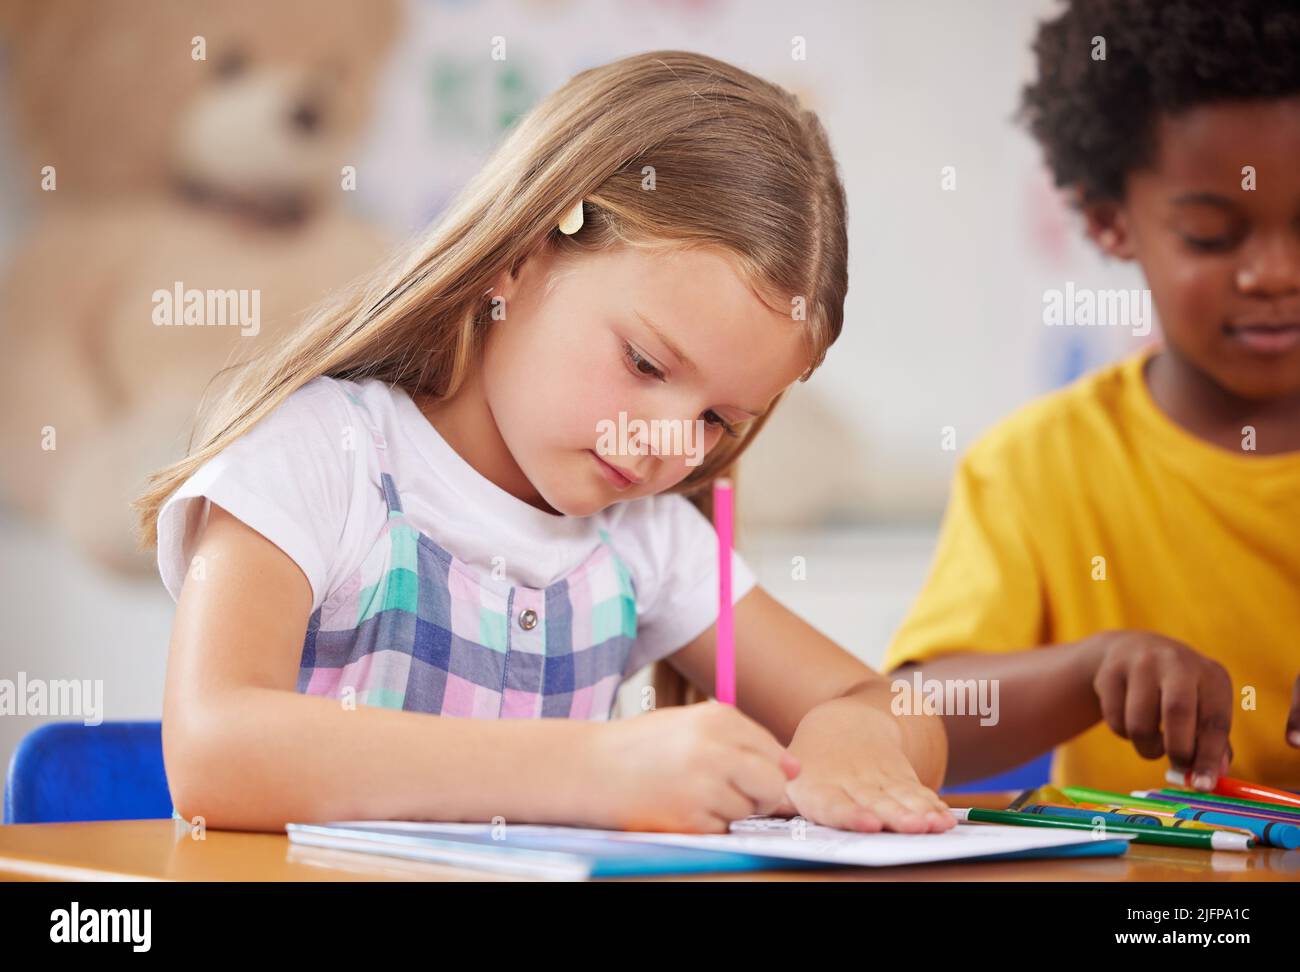 Our days are filled with learning activities. Shot of a preschooler colouring in class. Stock Photo